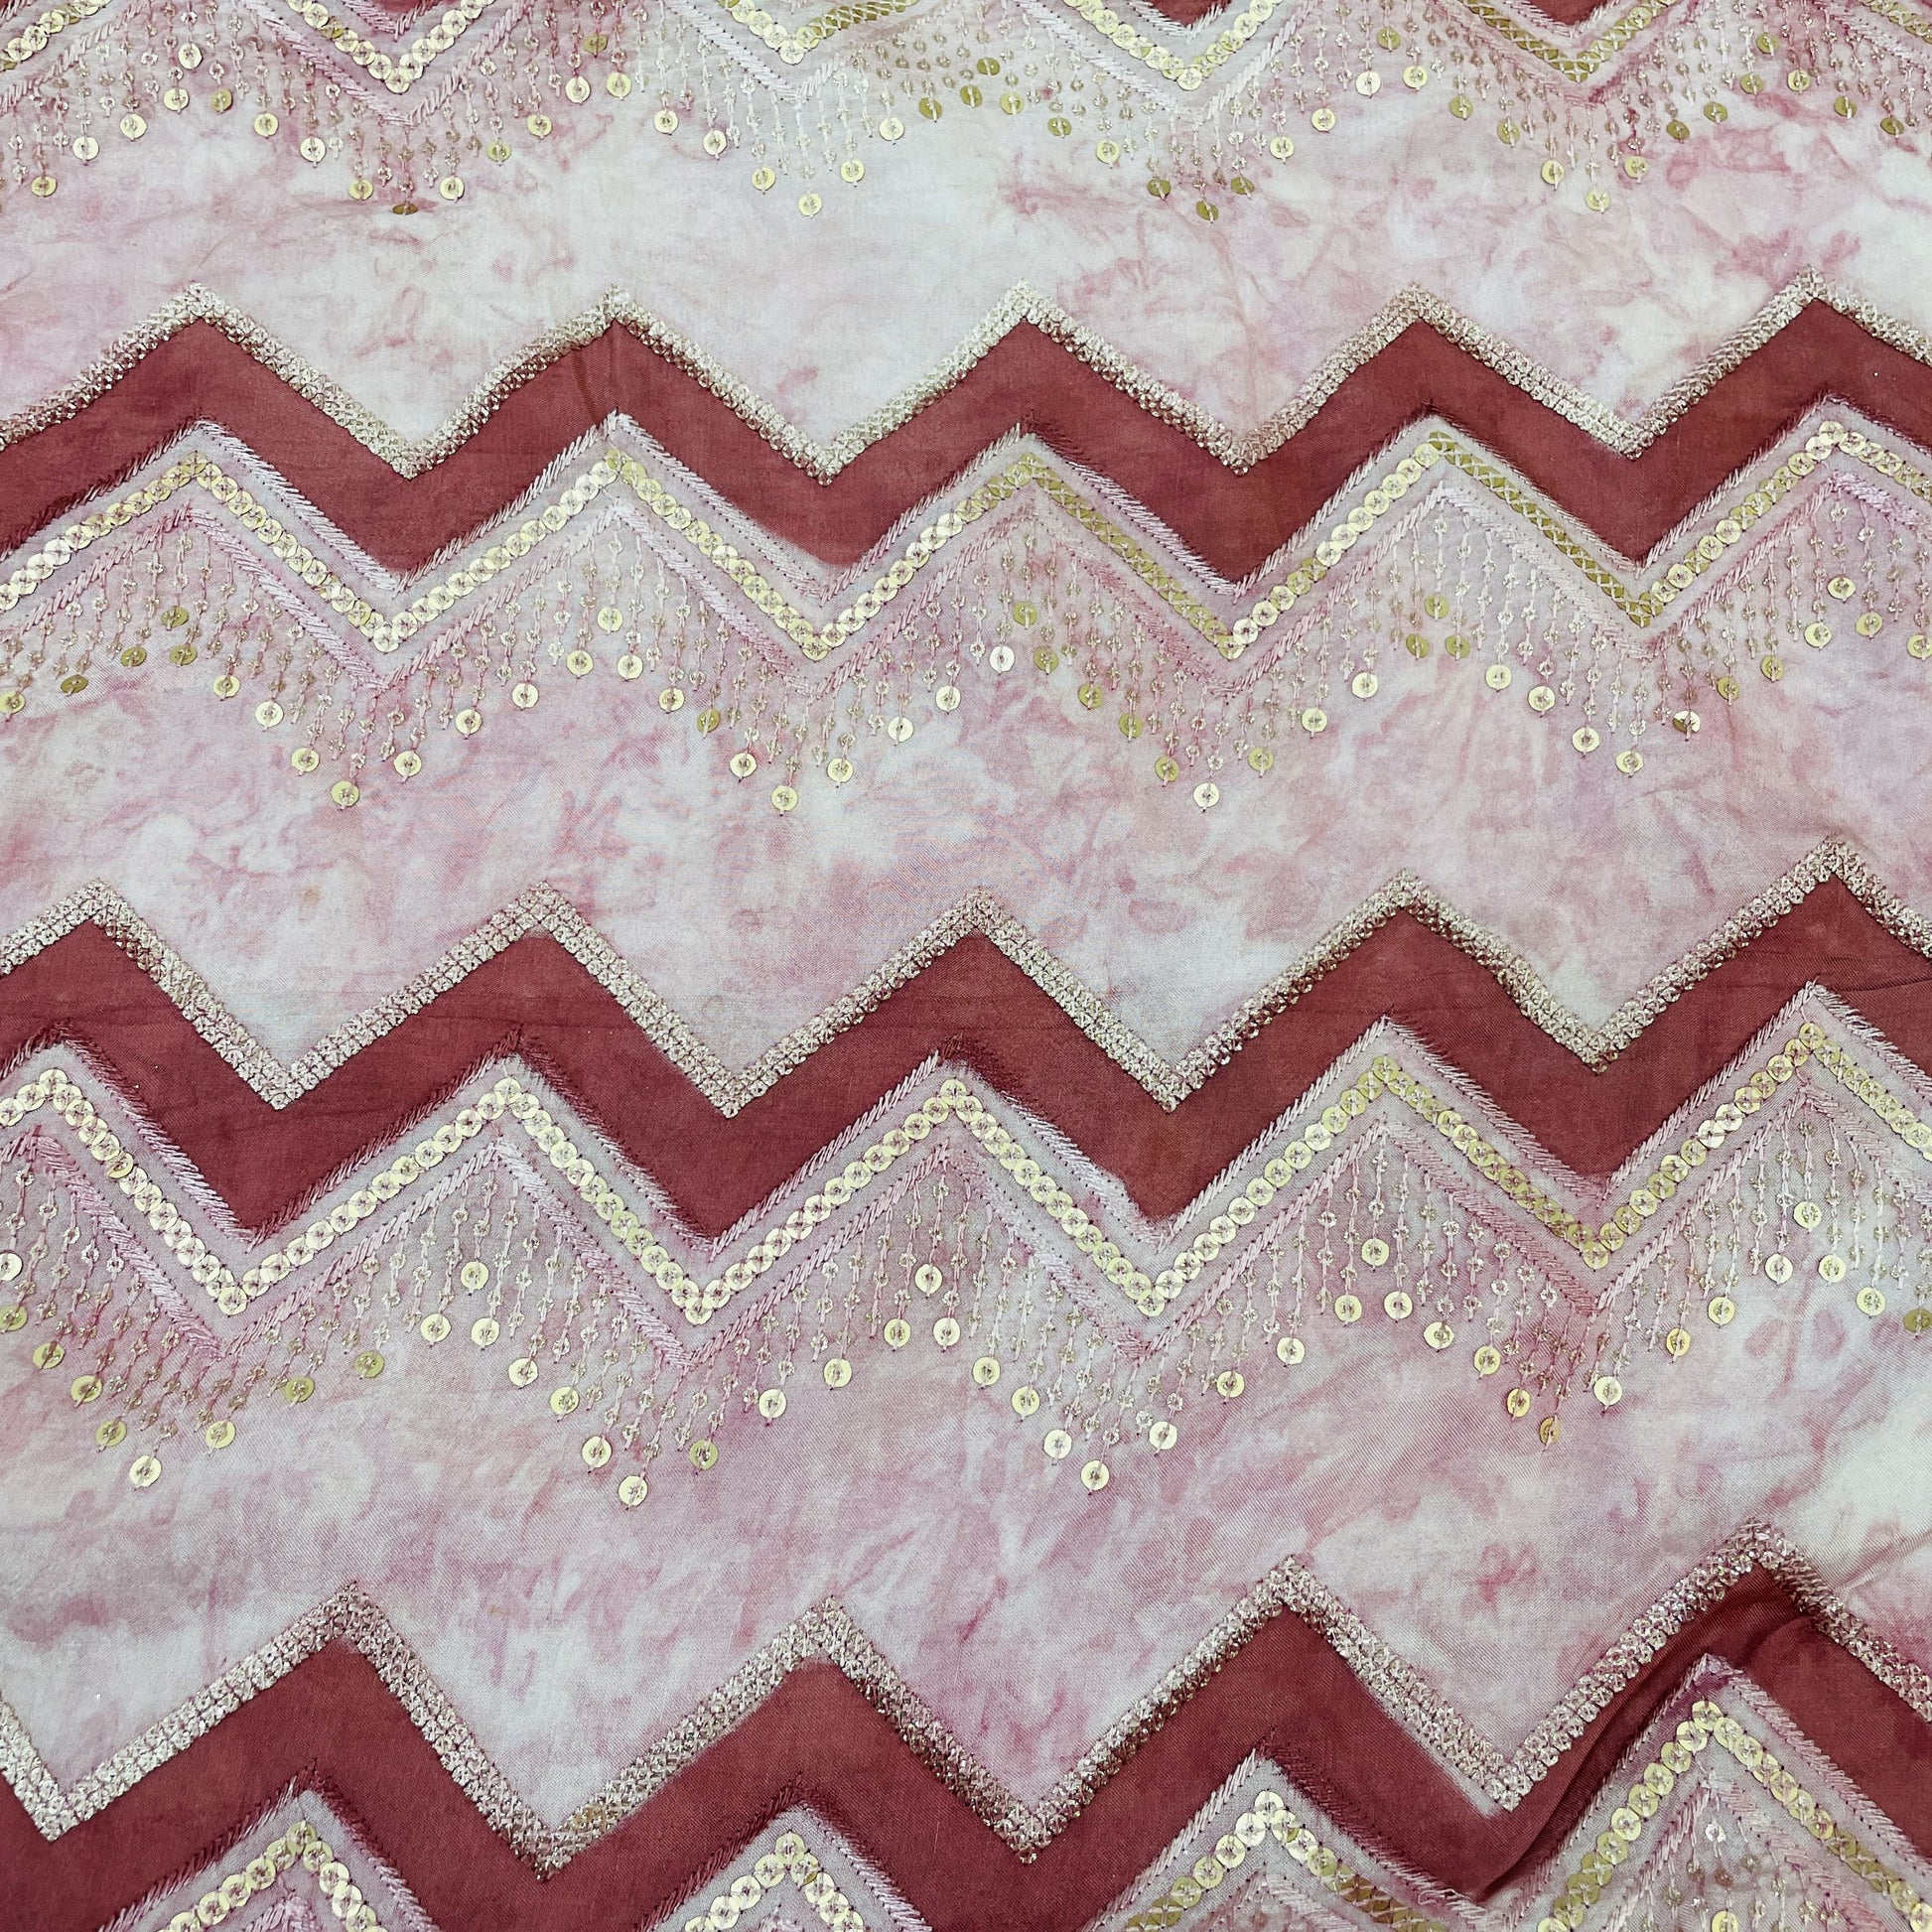 Exclusive Pink Chevron Sequence Embroidery Chinnon Fabric